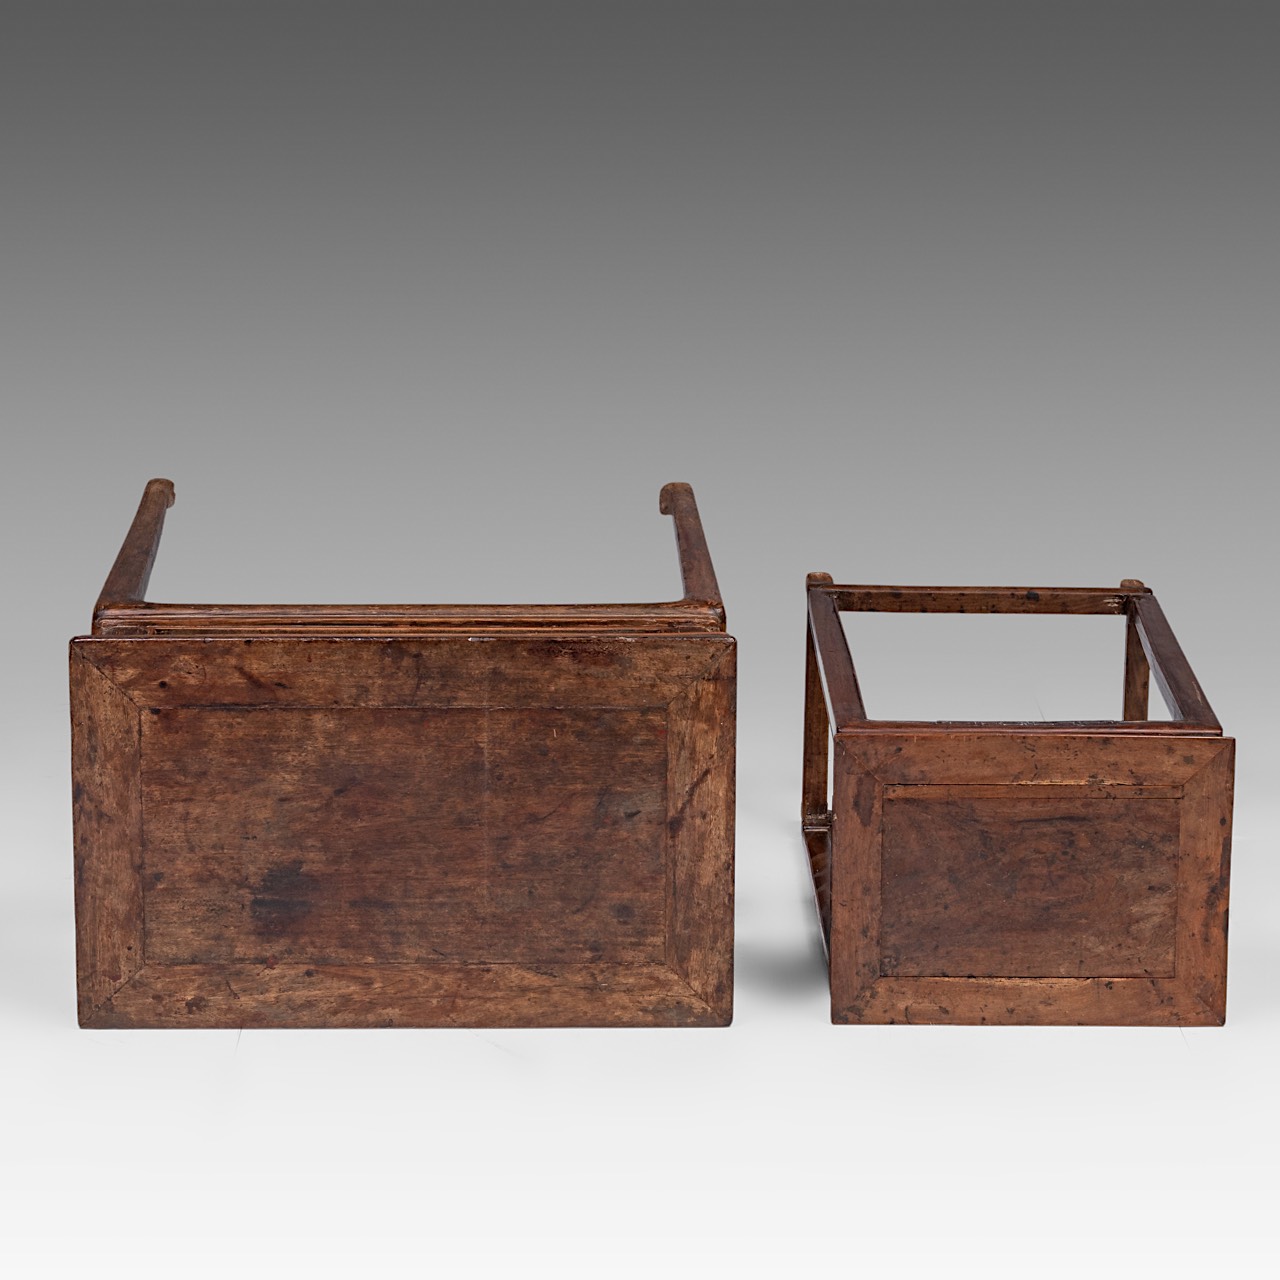 Two Chinese hardwood side tables, mid - late Qing dynasty, largest H 82 - 69 x 42 cm - Image 6 of 7